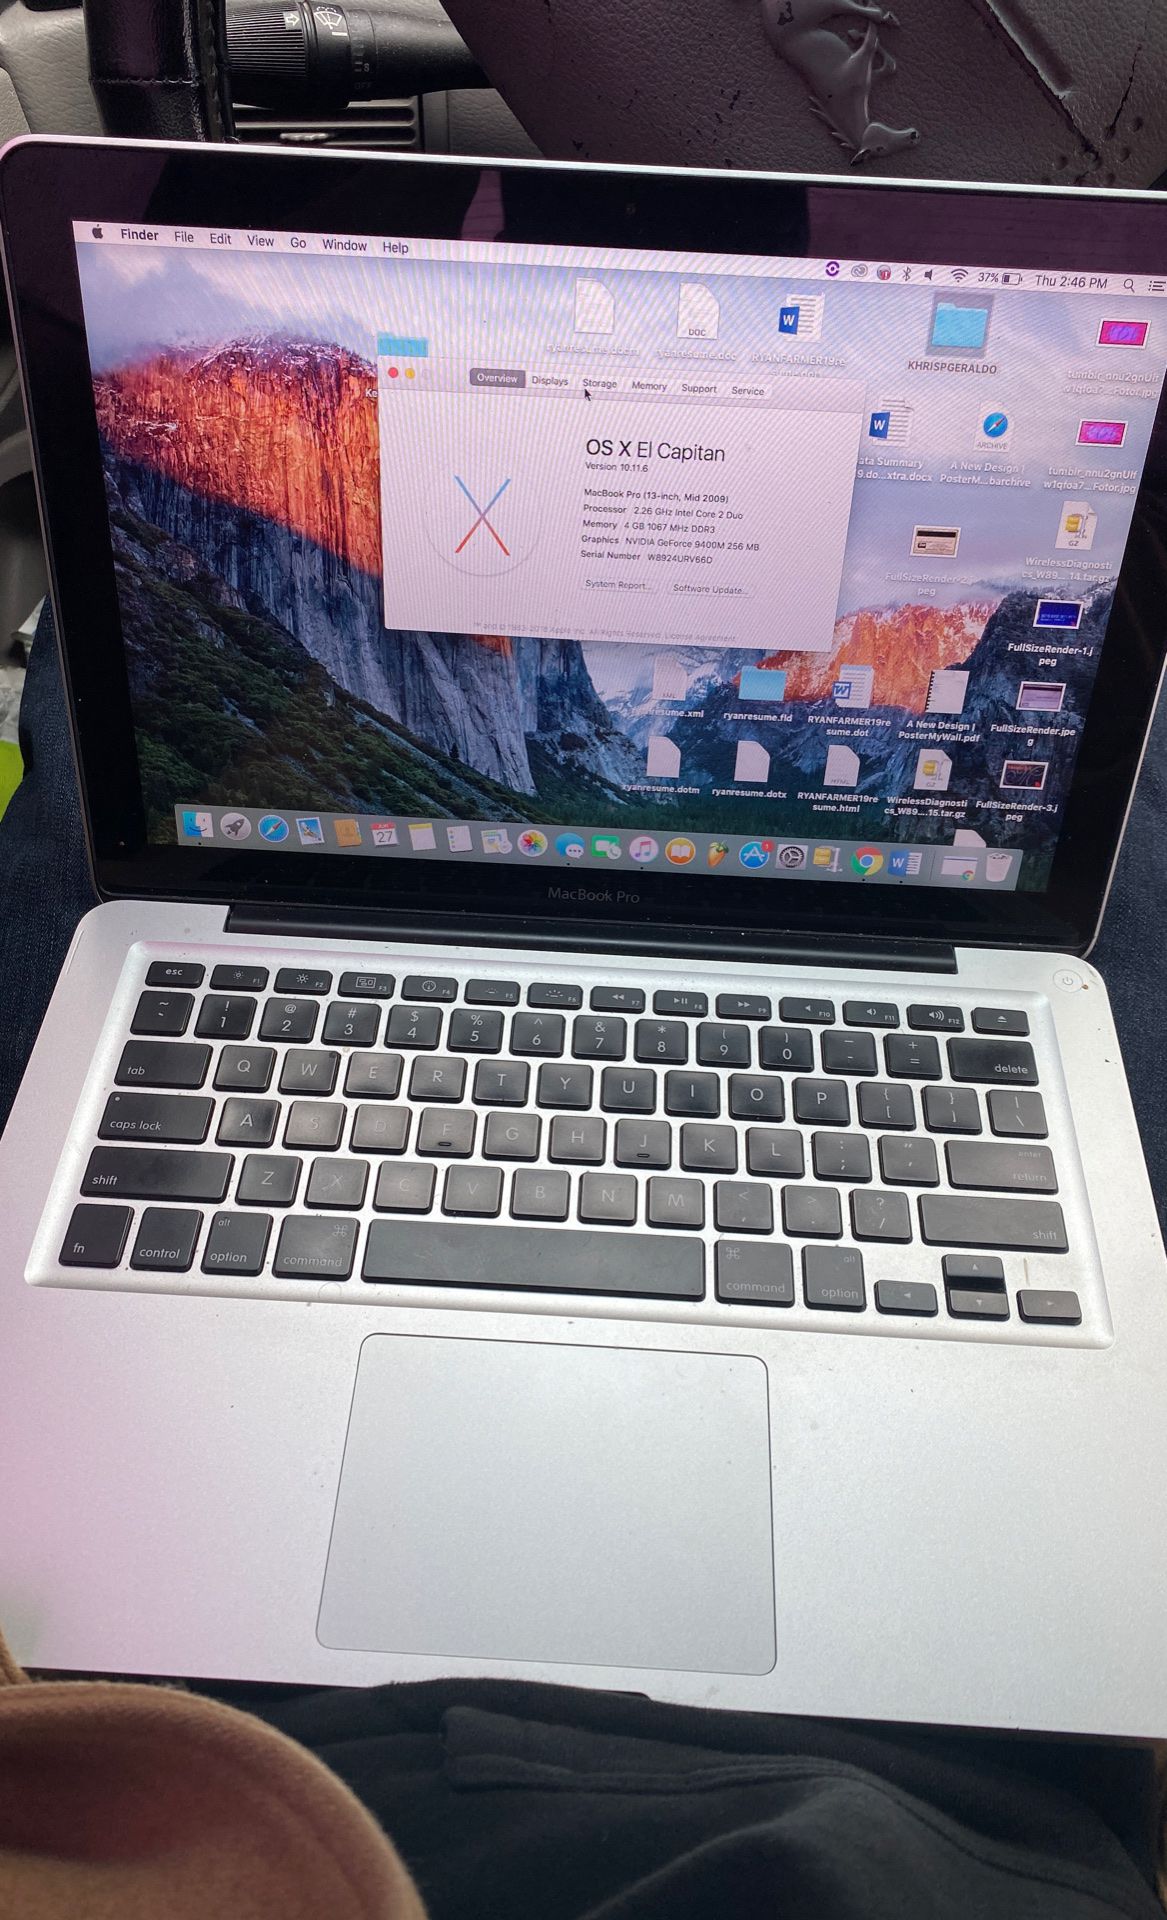 MacBook for sale w/ Charger